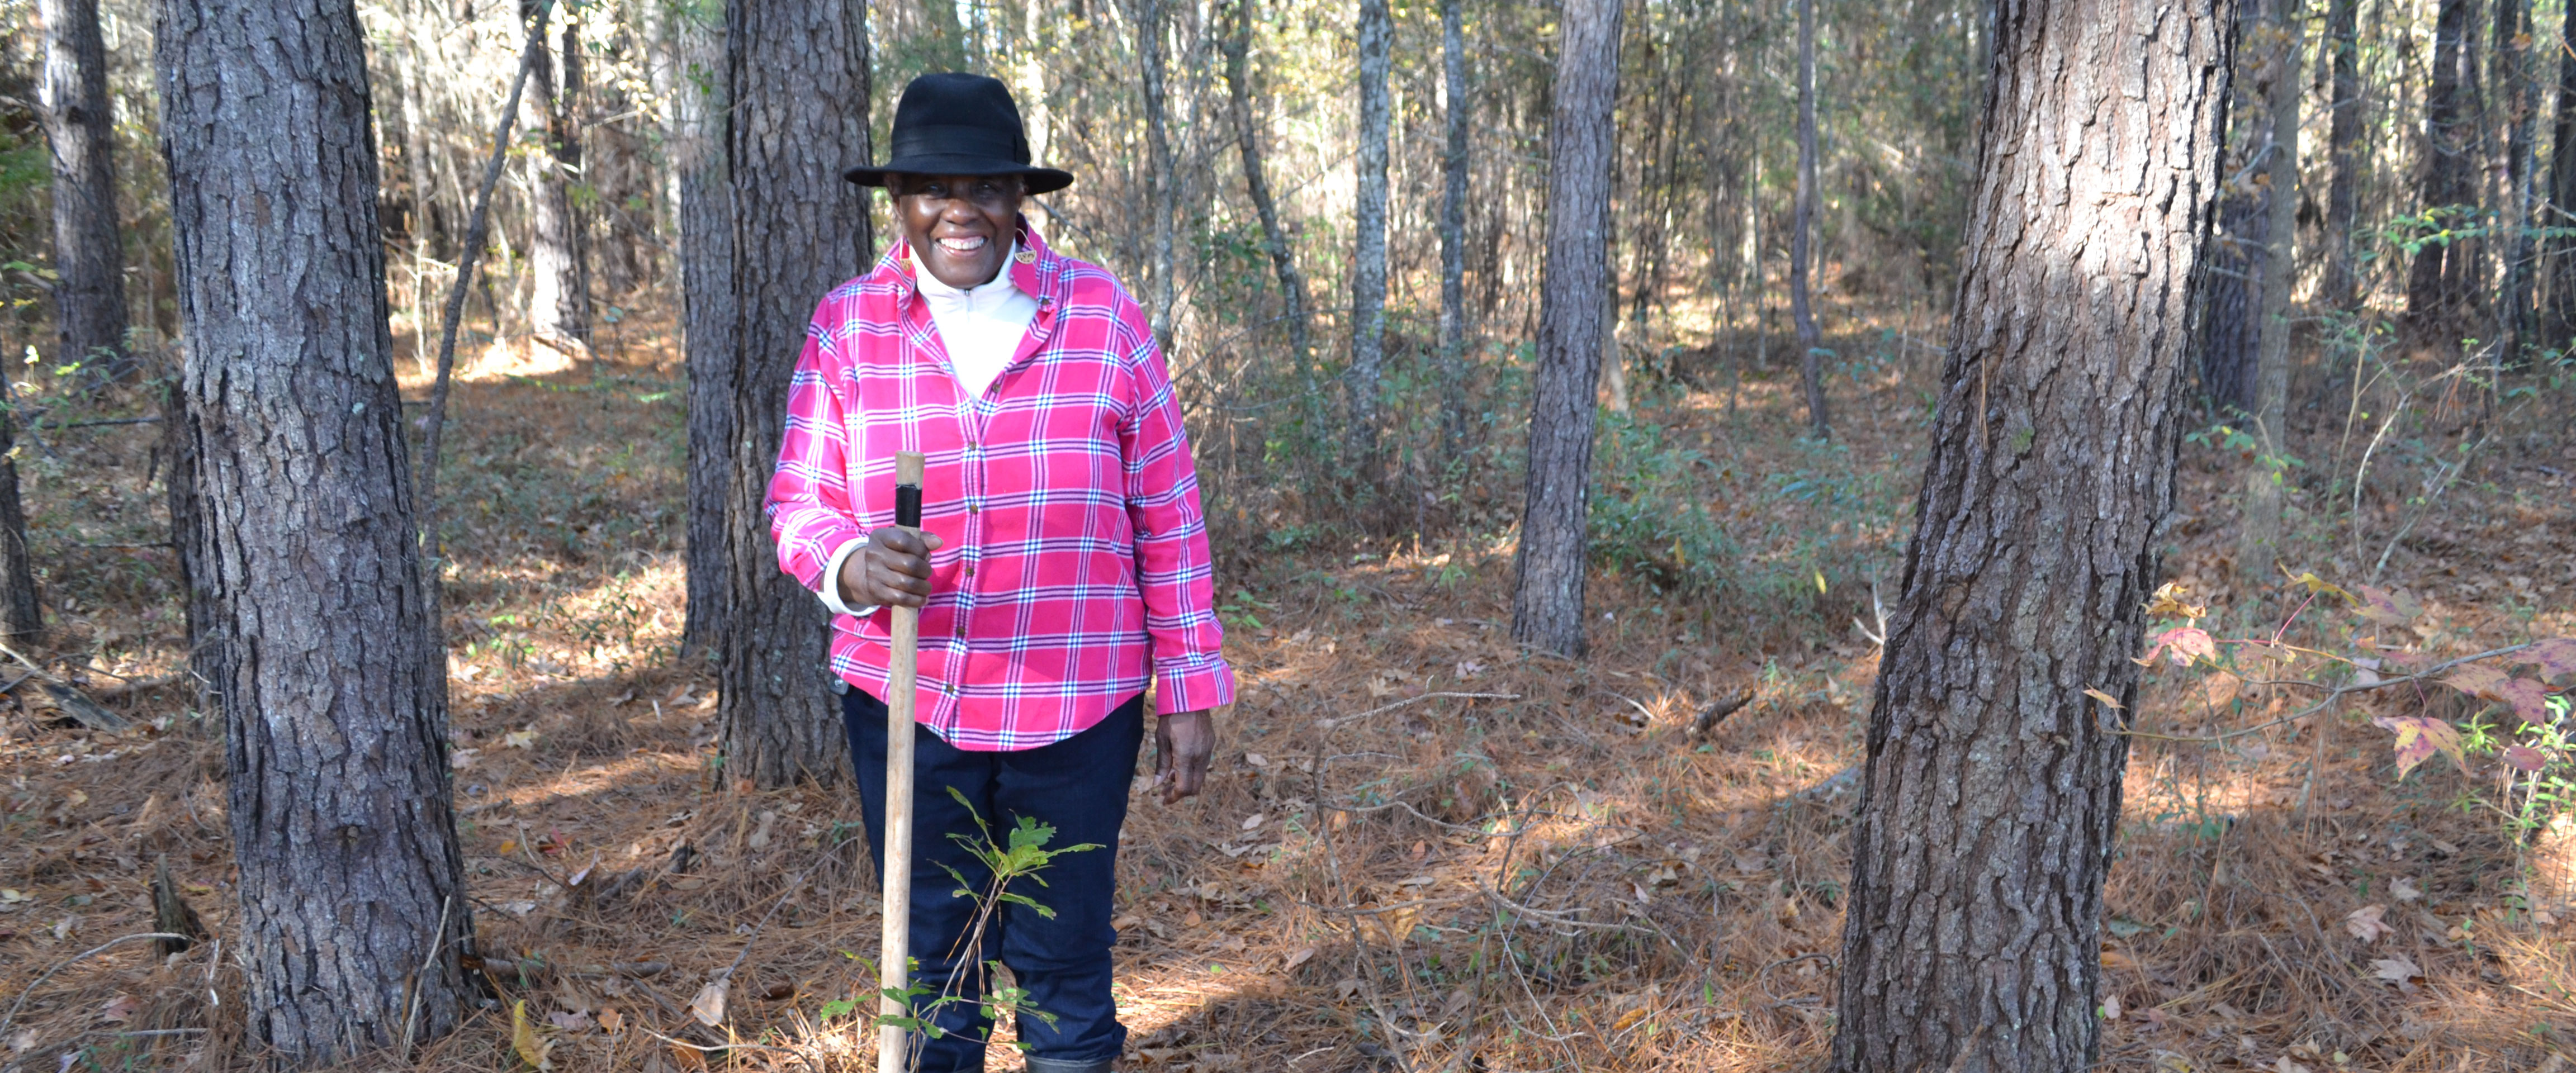 Lillie McGill on her 25-acre property in Kingstree, SC